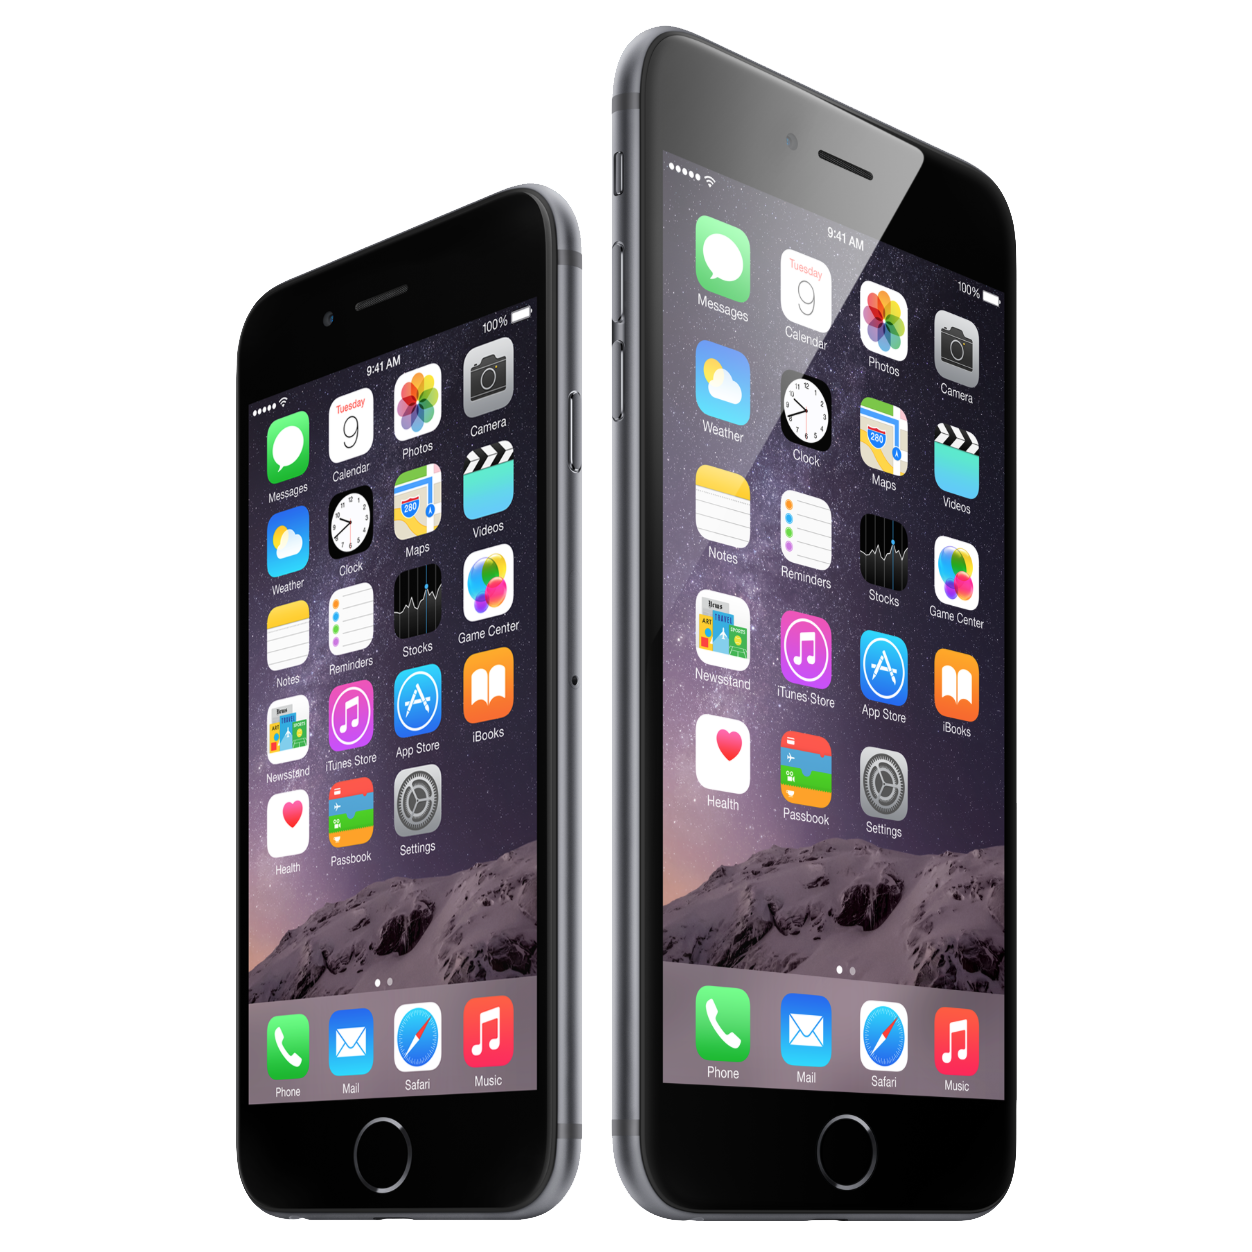 Apple &#039;iPhone 6&#039; and &#039;iPhone 6 Plus&#039; [Photo Gallery]